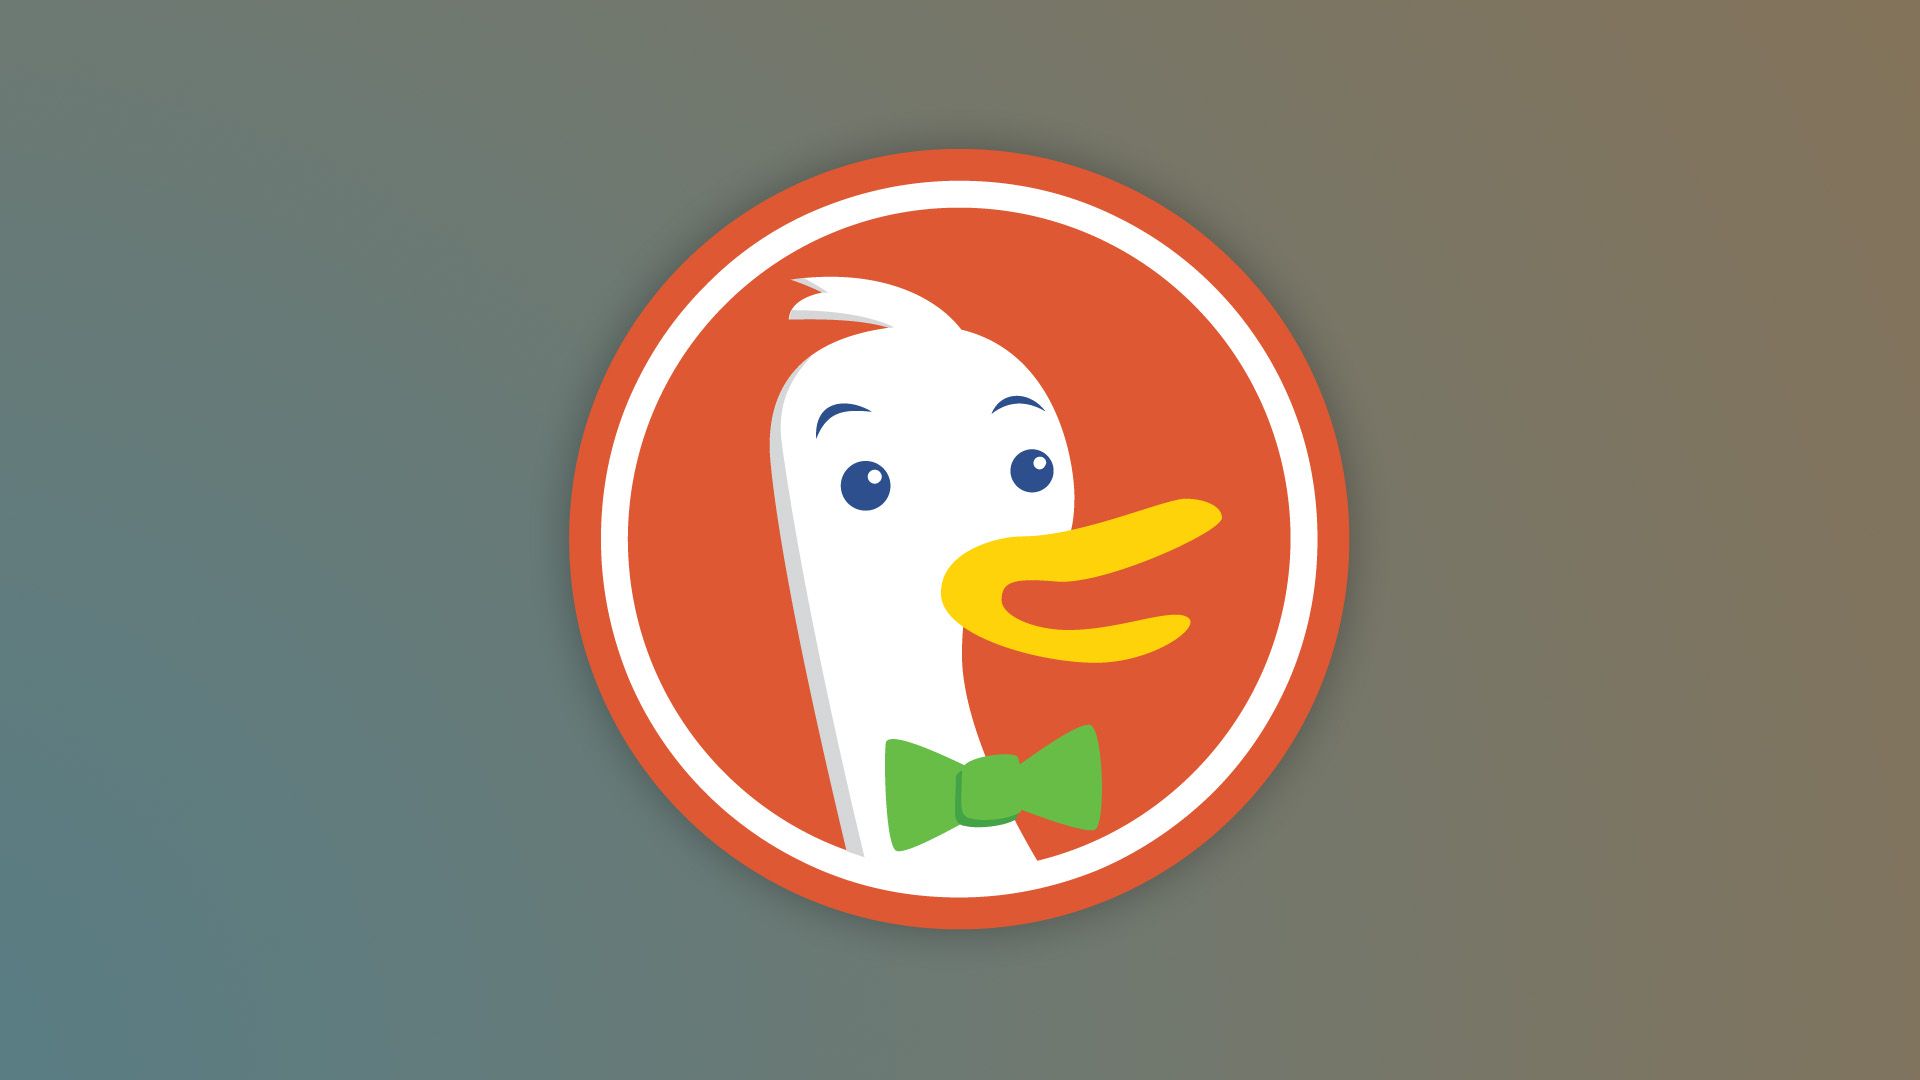 There’s a New Technique to Use ChatGPT: DuckDuckGo